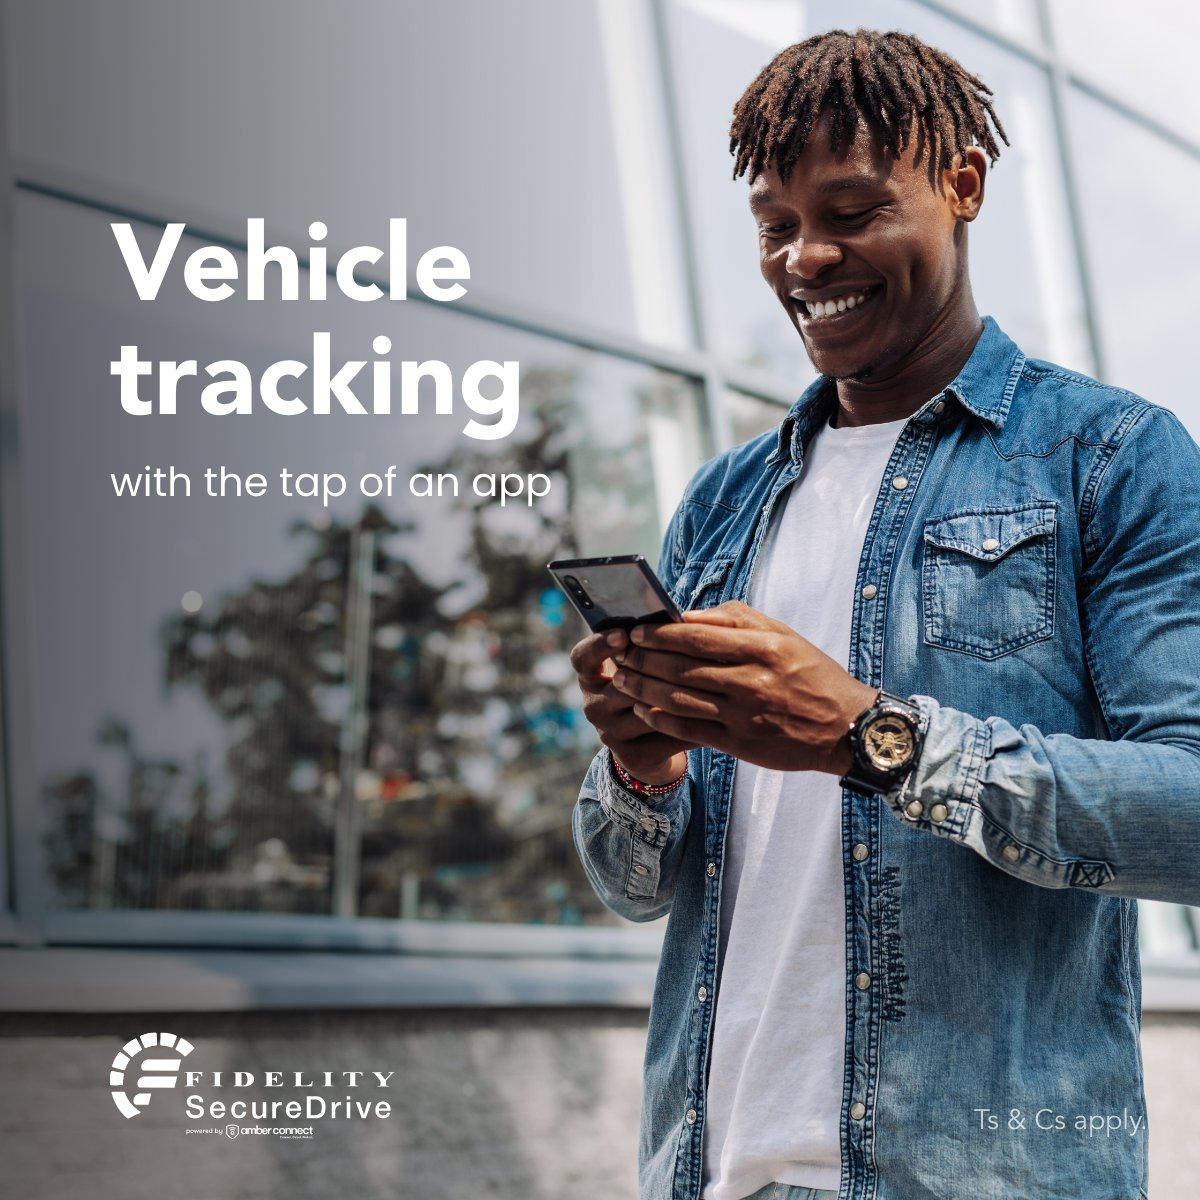 Keep an eye on your car’s every move with the SecureDrive app!

#FidelitySecureDrive #VehicleTracking #YourDrivingCompanion